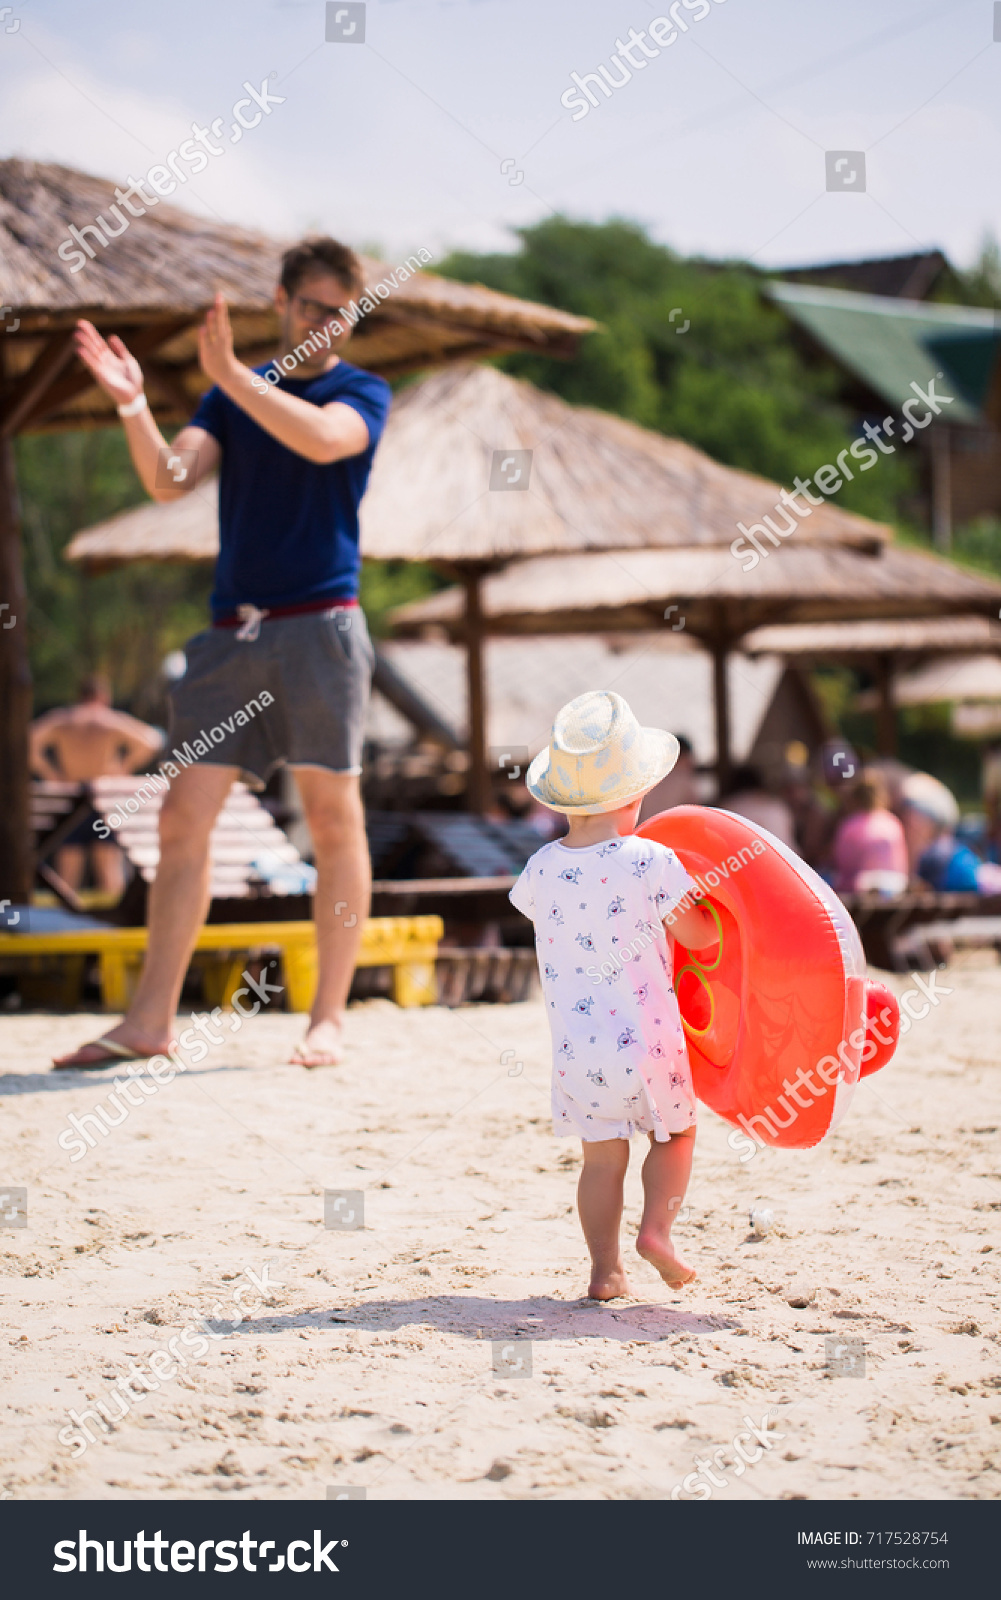 Back view of little boy who walking on the beach and keeping a float in hands #717528754